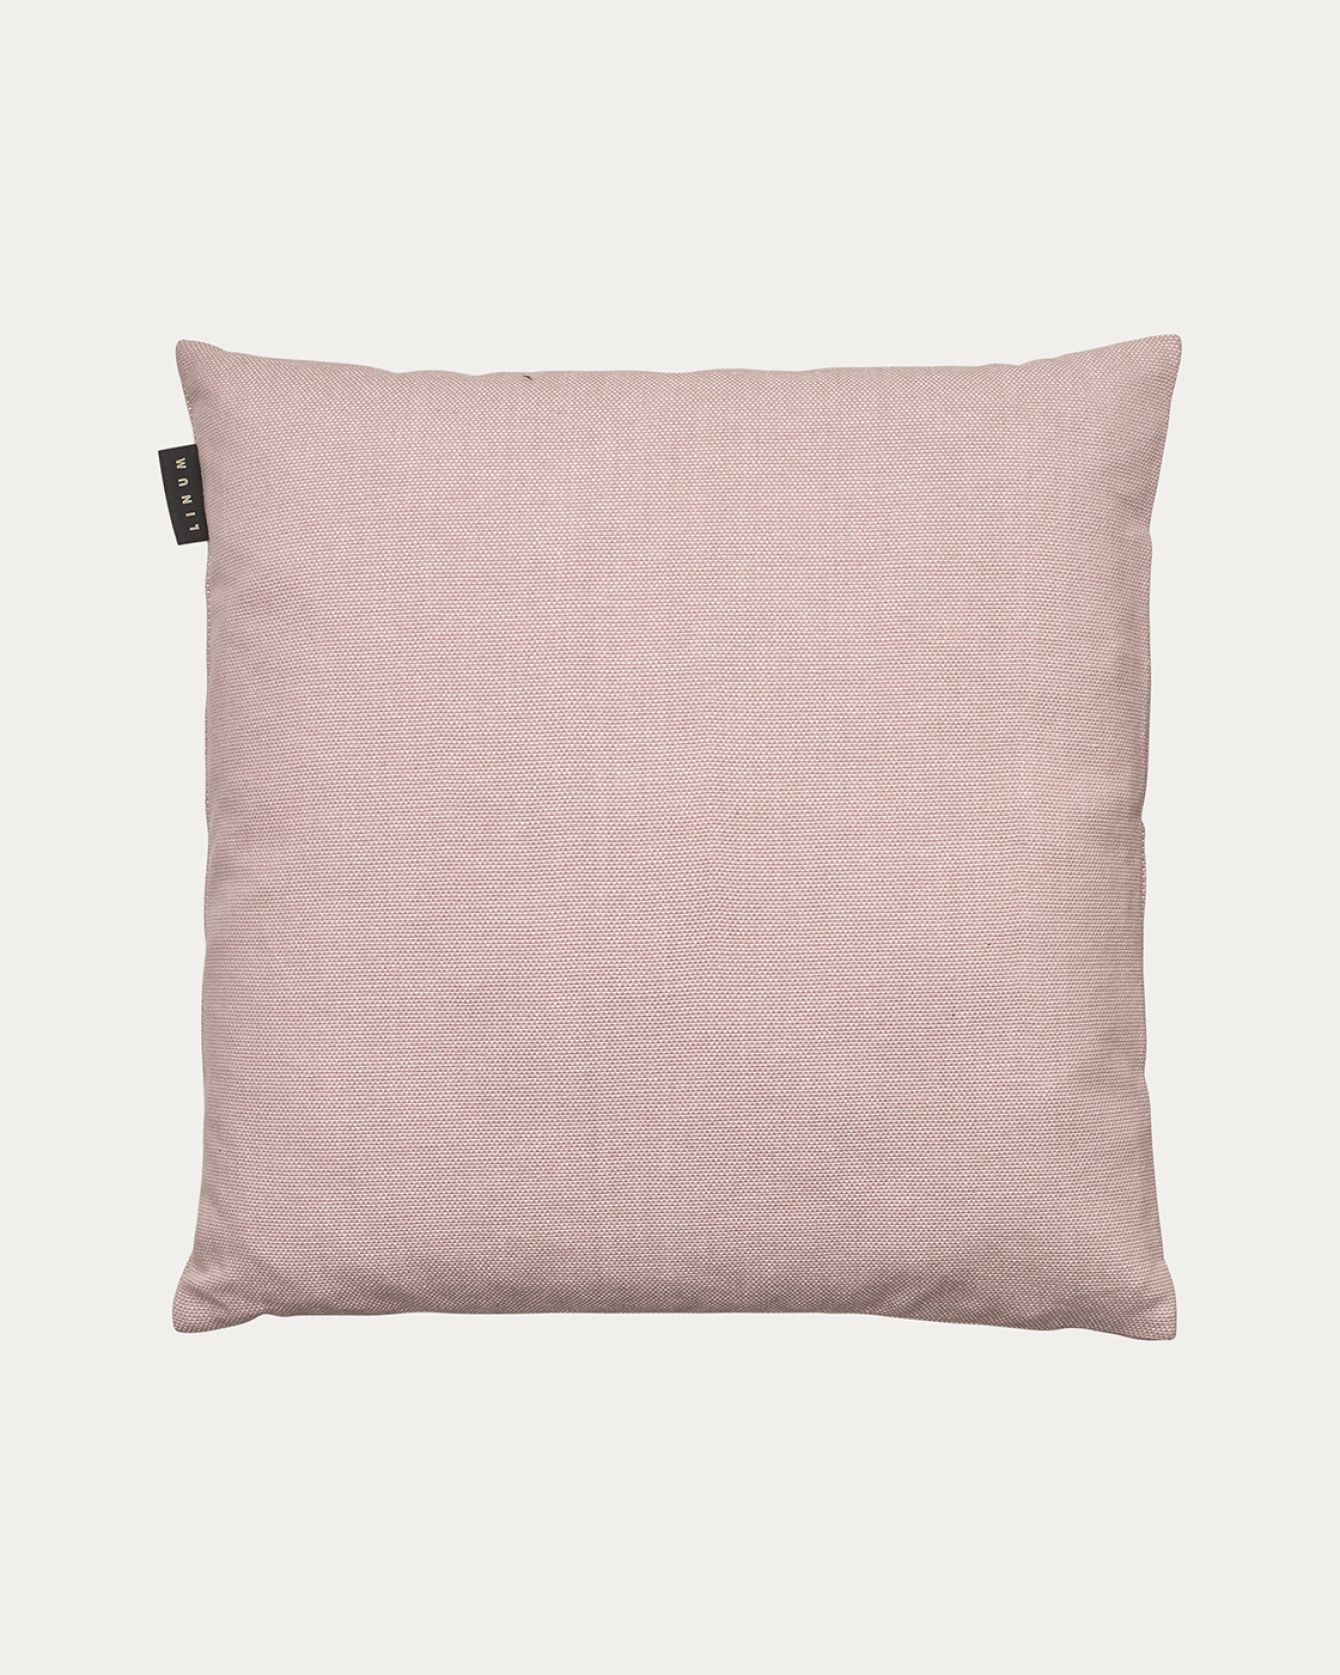 PEPPER Cushion cover 50x50 cm Dusty pink